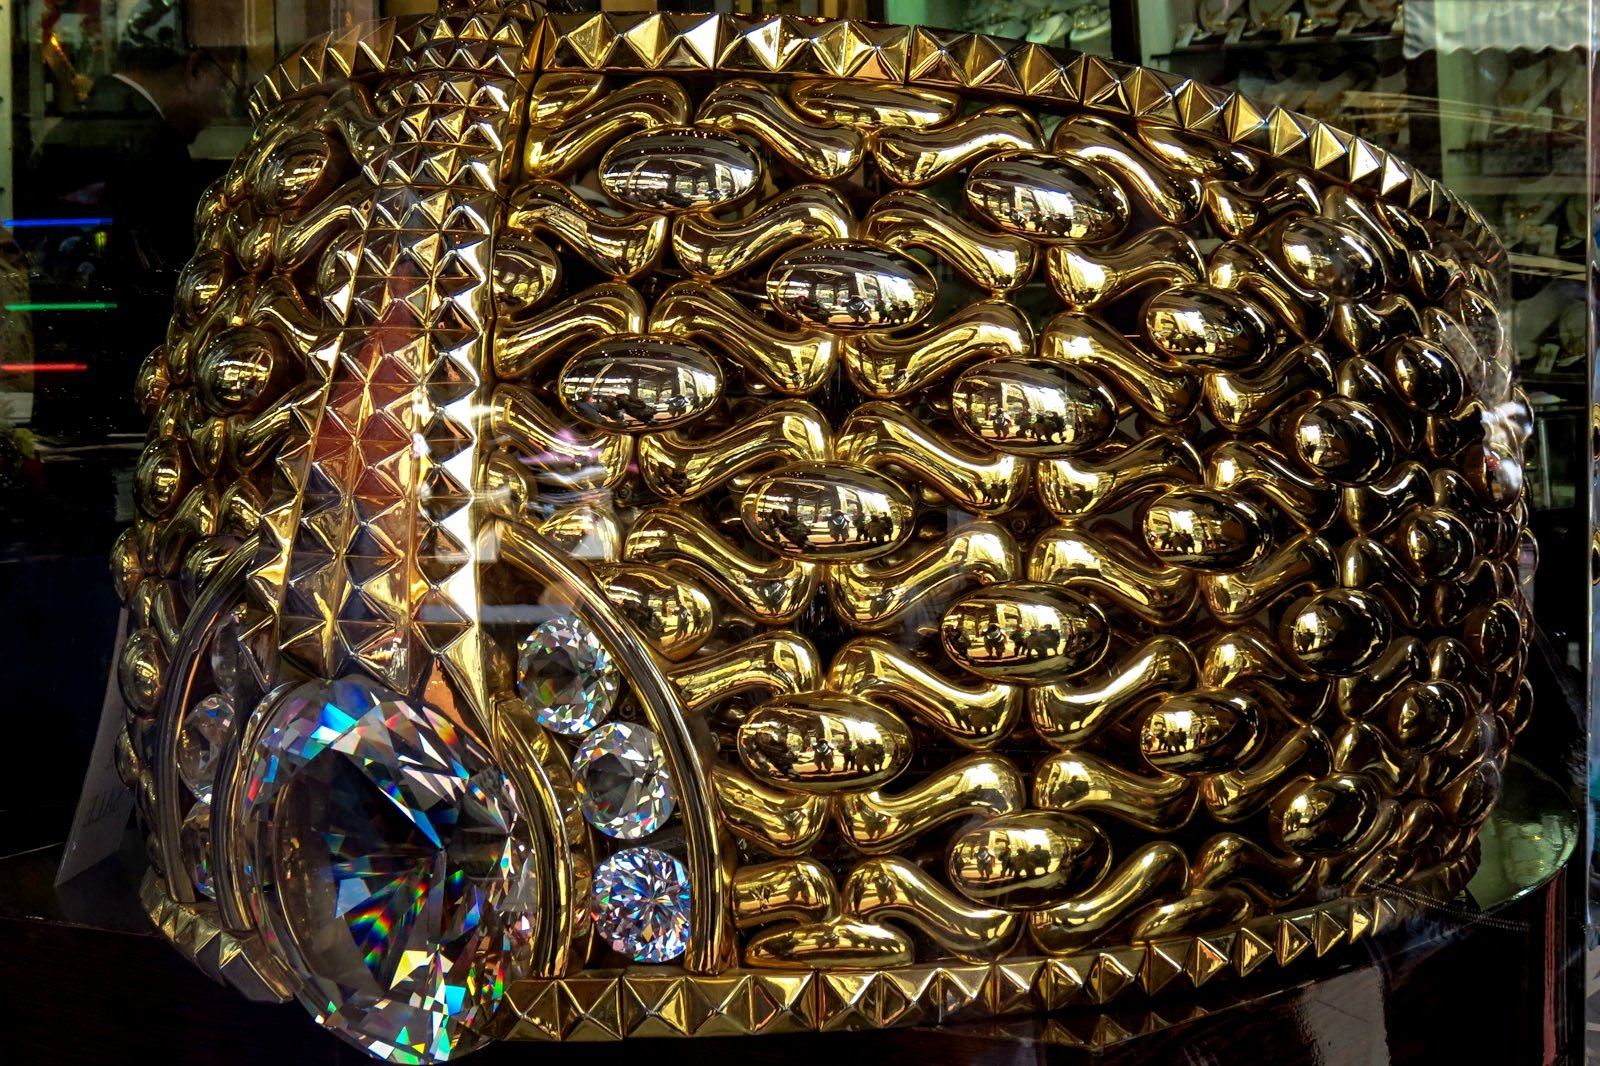 How to see the largest gold ring in the world in Dubai